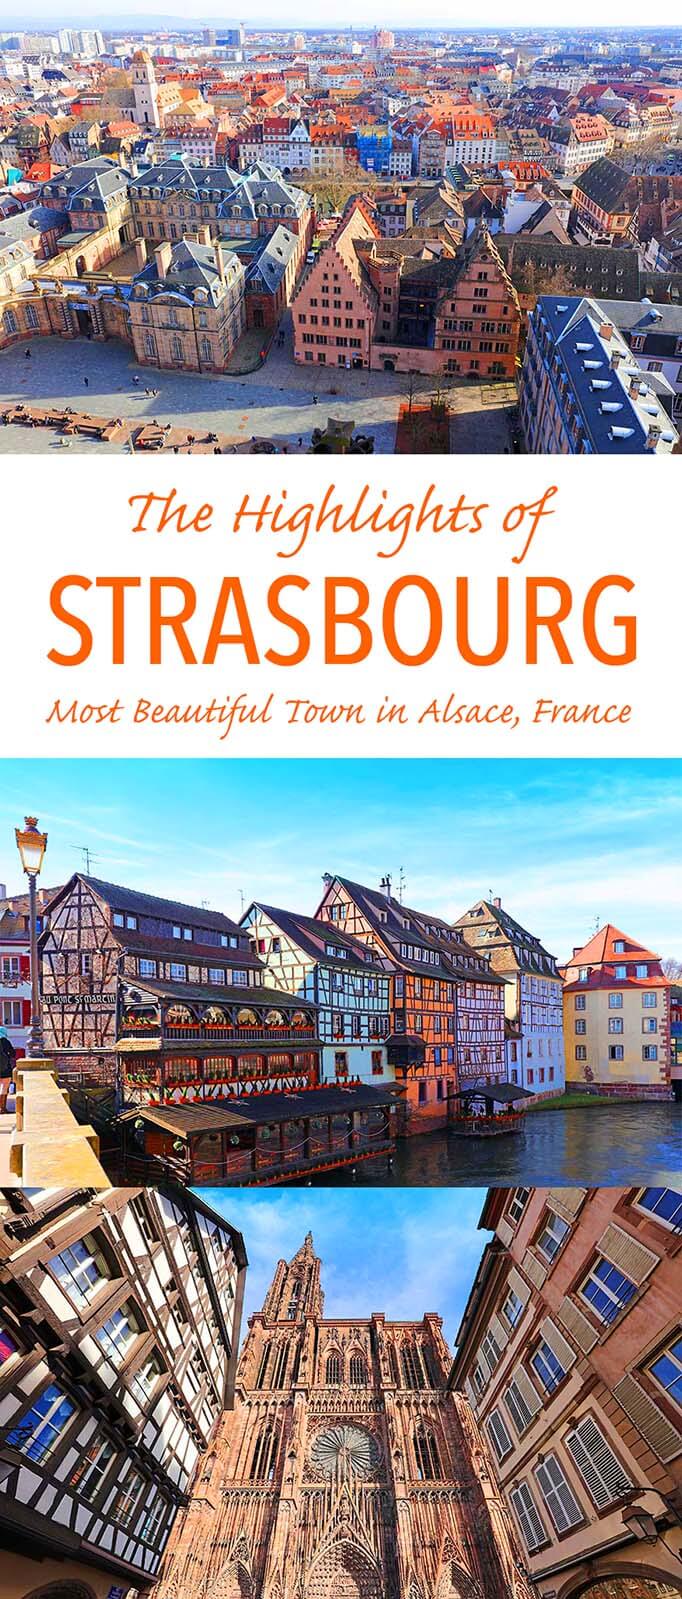 See the main highlights of Strasbourg France with this one day itinerary that includes all the information you need to get the most of your trip. Plus a great off the beaten path tip as well. Check it out!